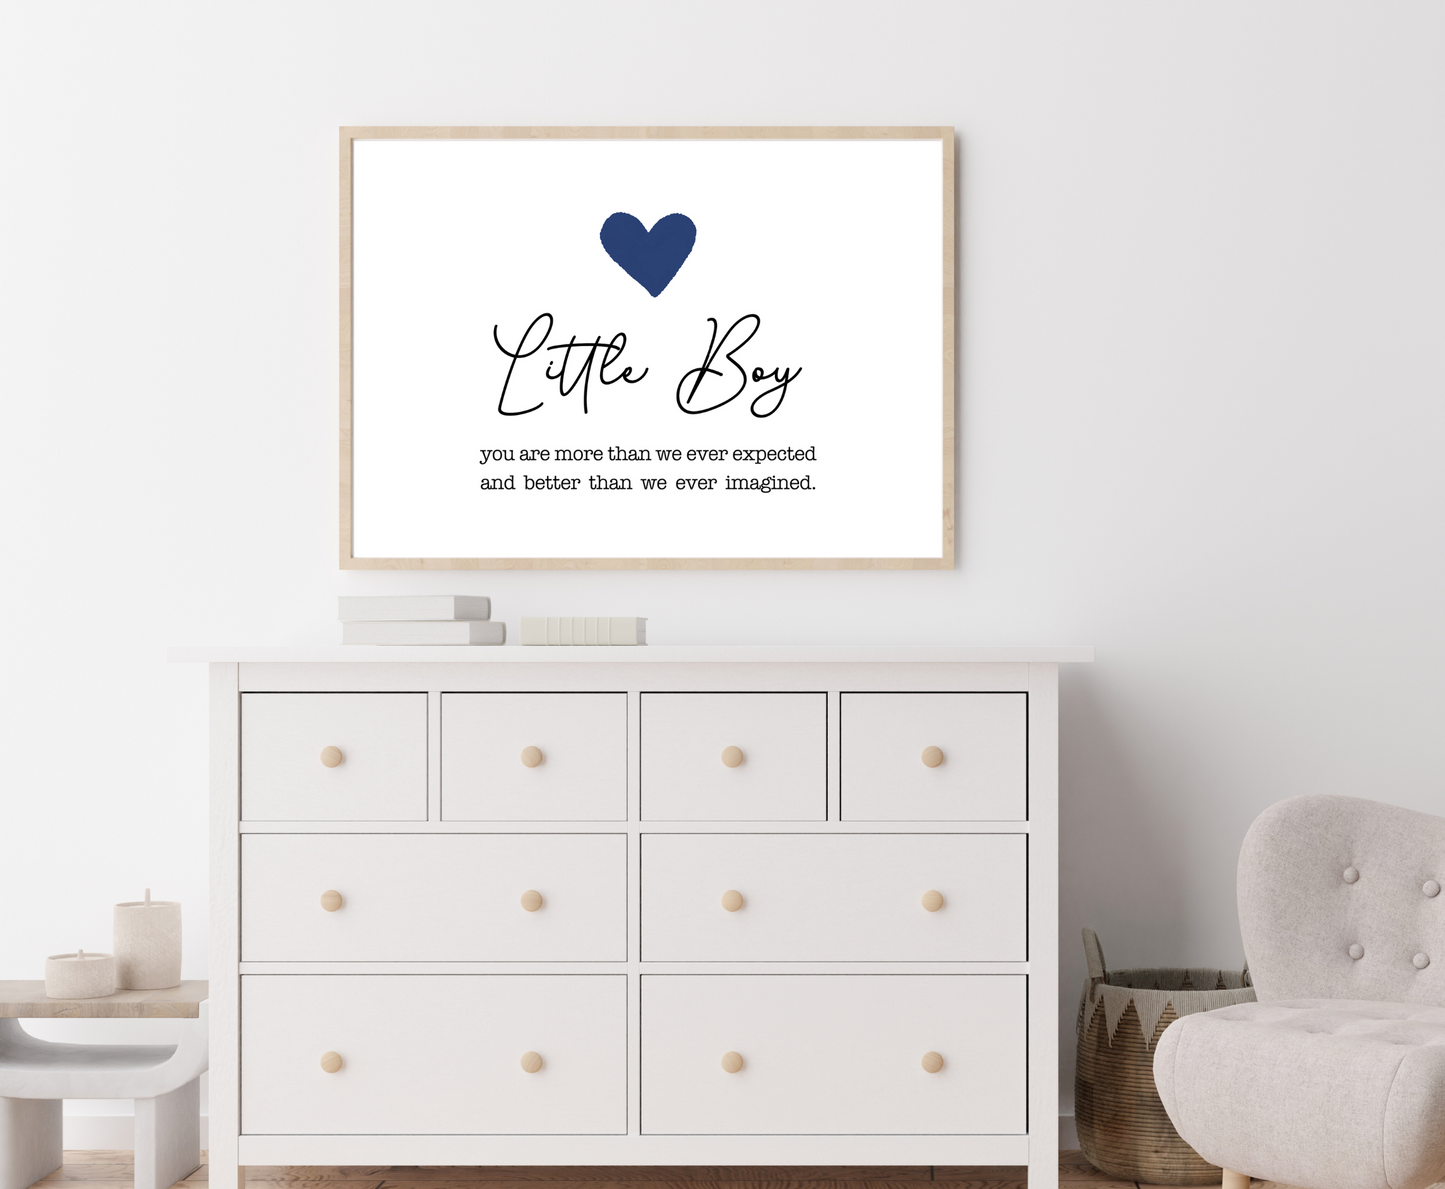 An image of a white dresser with a frame hanging on the wall behind it. The frame displays a dark blue heart with a piece of writing below that says: Little boy, you are more than we ever expected and better than we ever imagined.